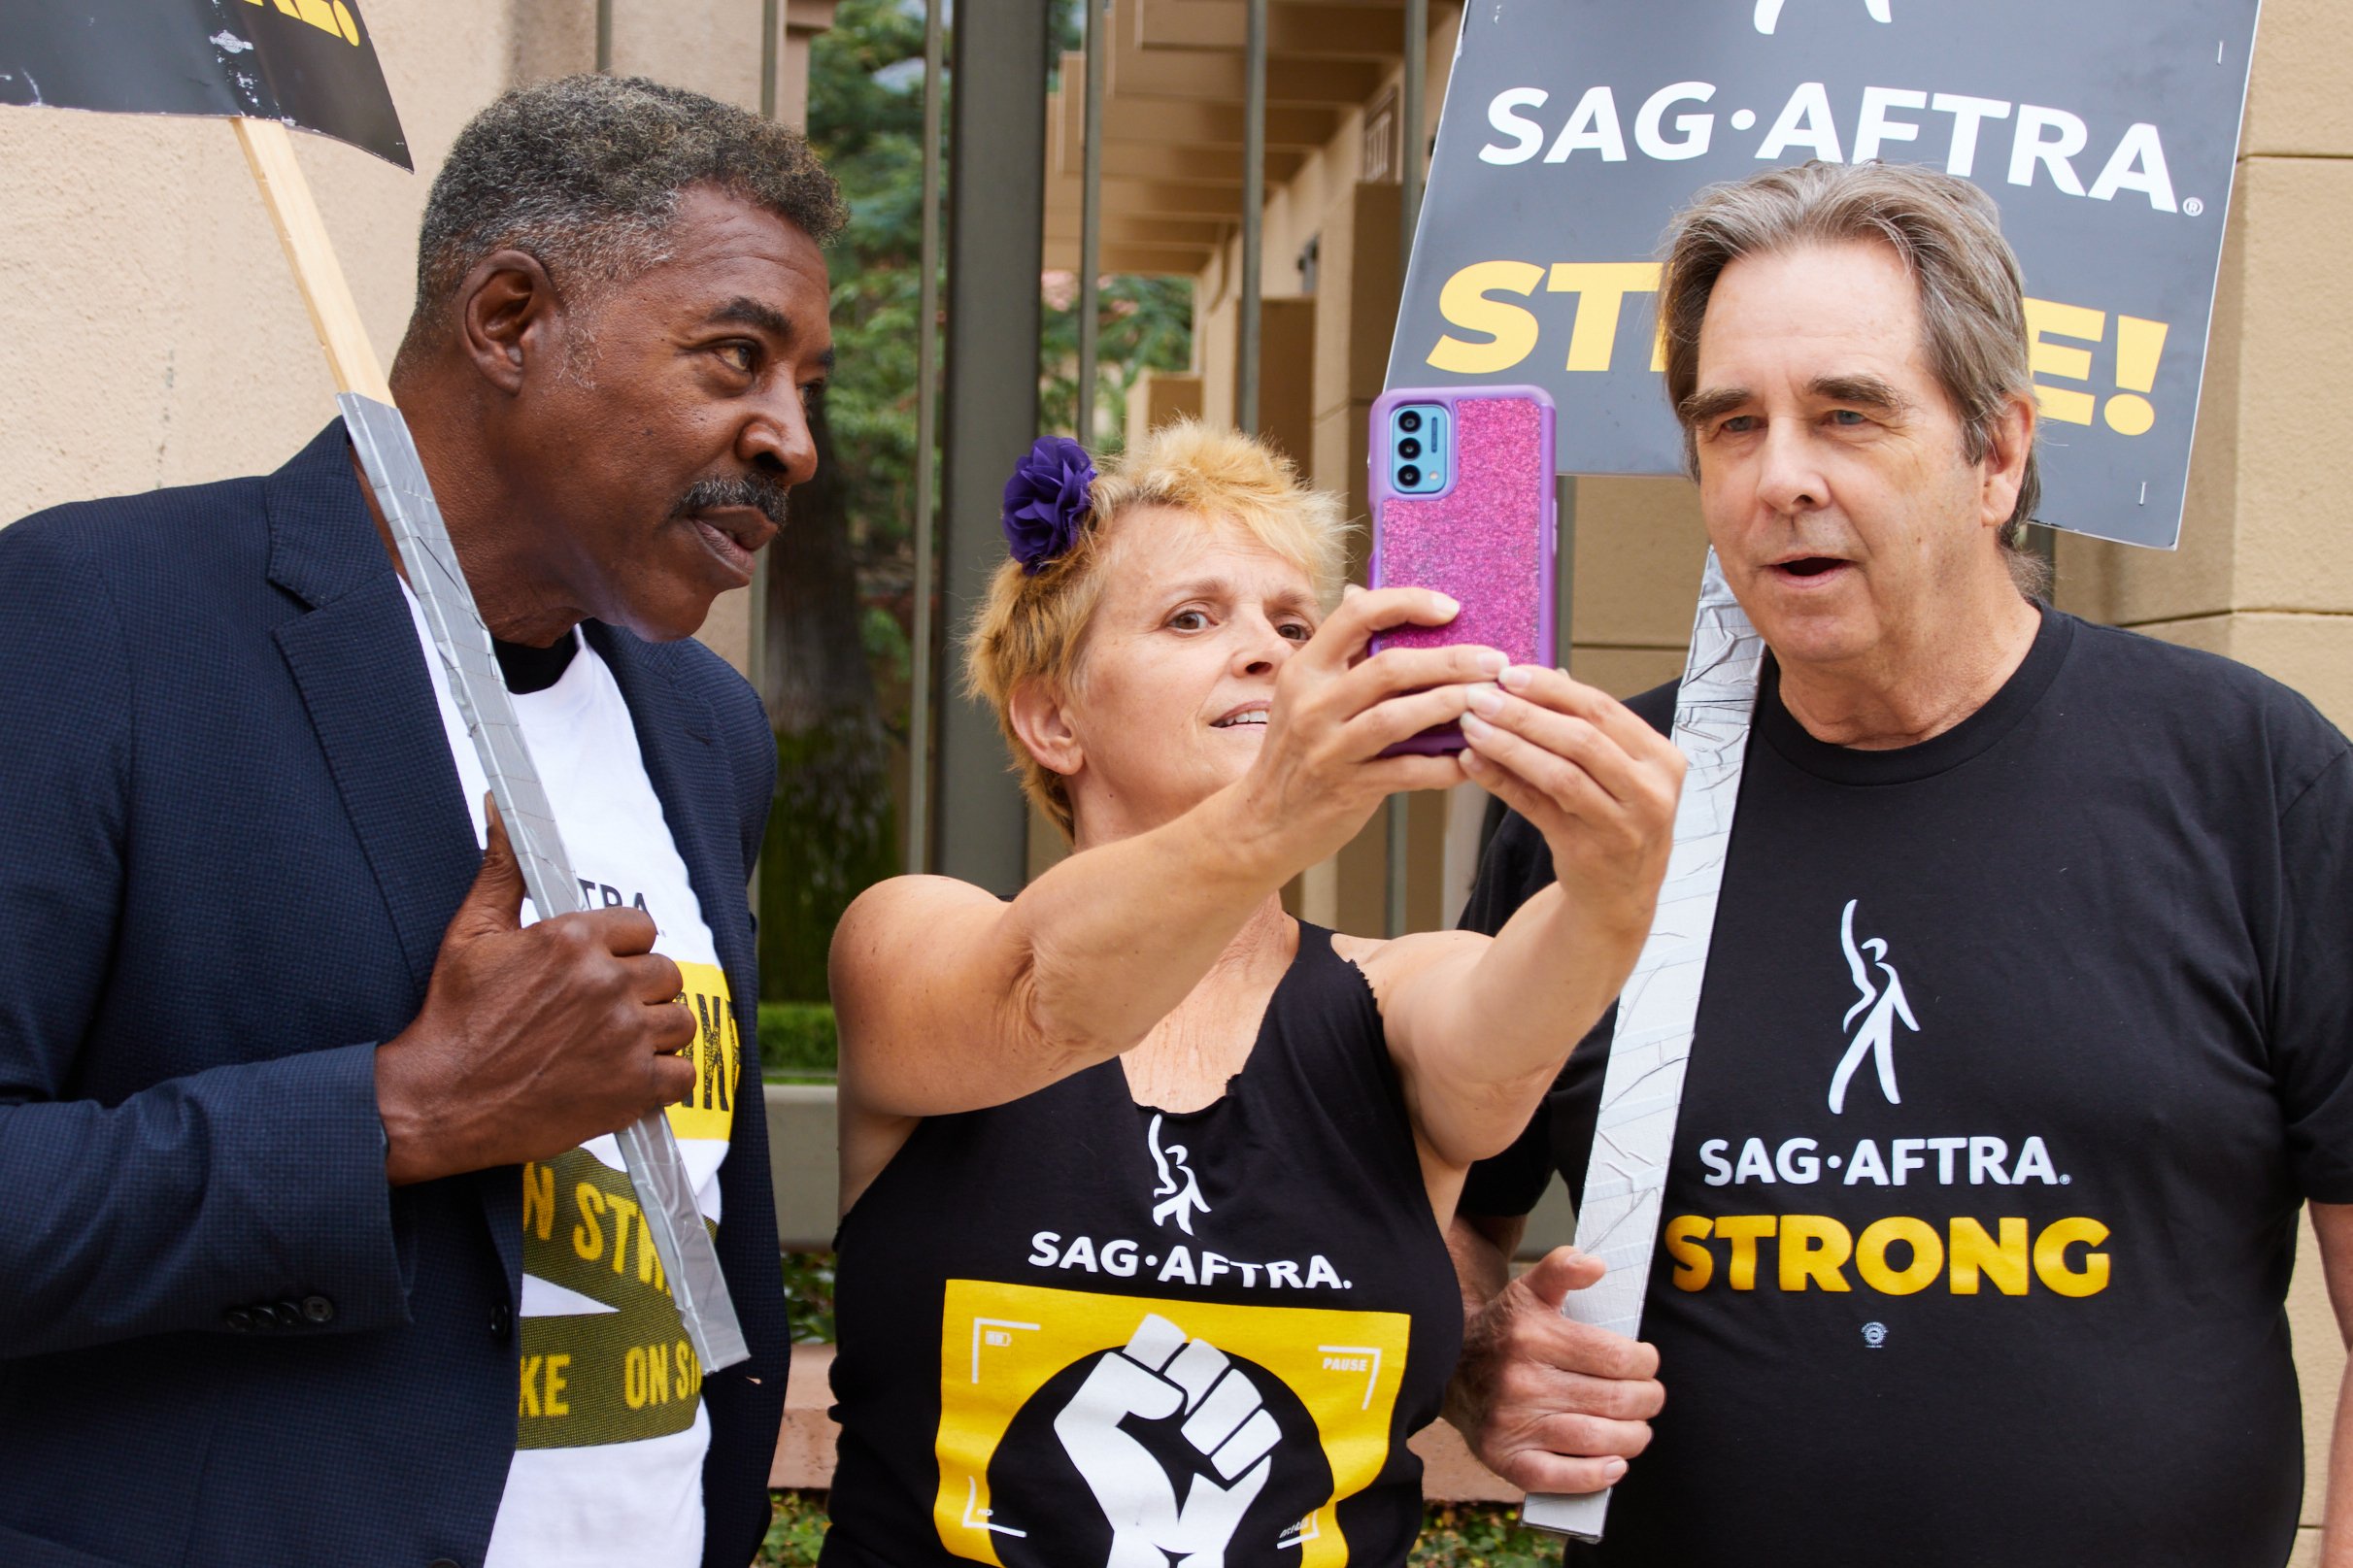  Actors Ernie Hudson, Emelle, and Beau Bridges, left to right, recording a video together during the SAG-AFTRA strike in front of Warner Bros. Studio, Burbank, Calif., Sept 29, 2023. (Danniel Sumarkho | The Corsair) 